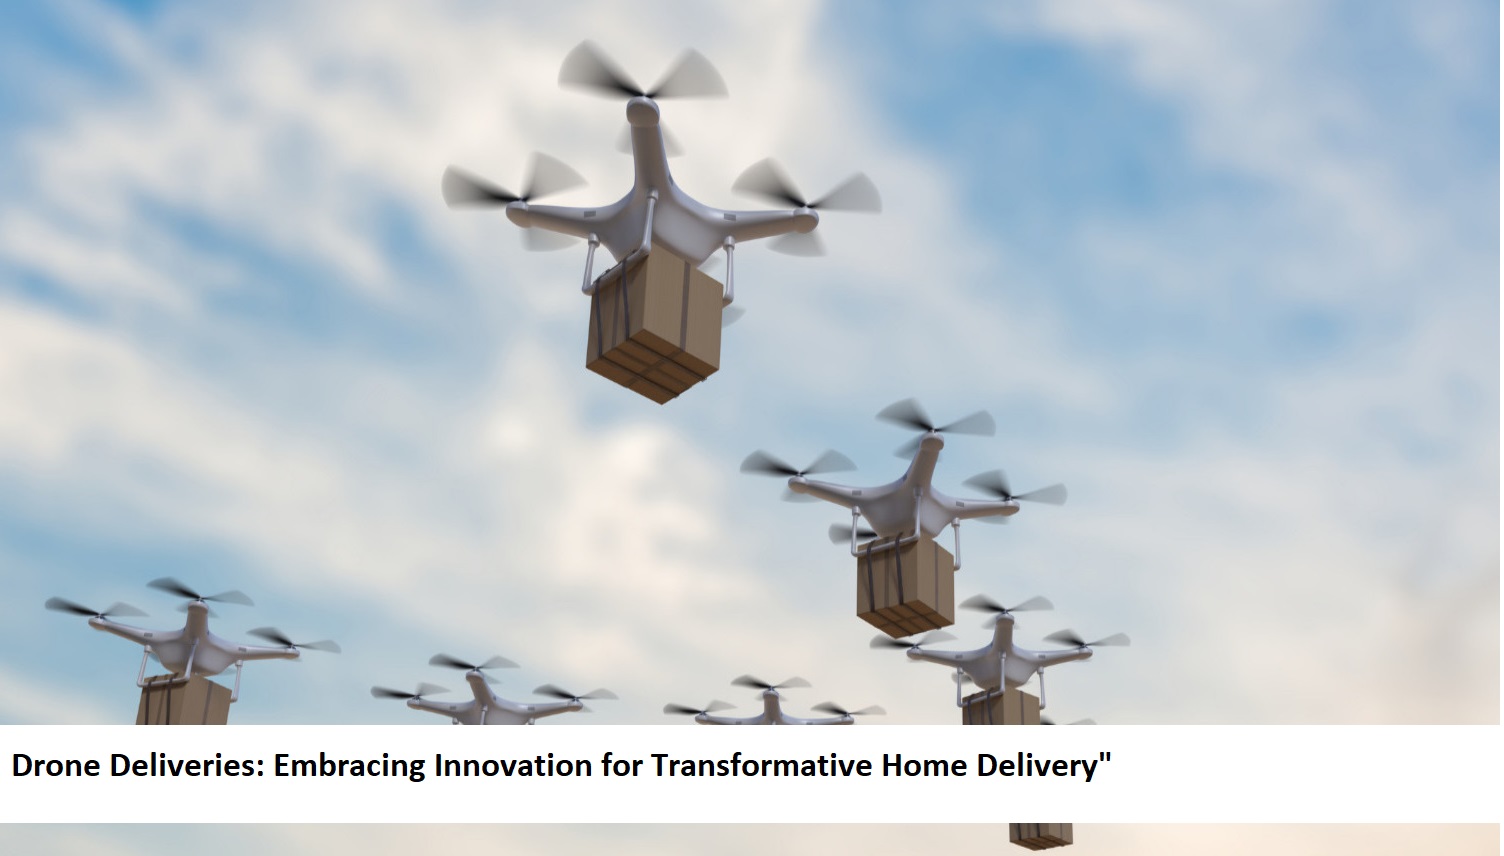 Drone Deliveries Embracing Innovation for Transformative Home Delivery